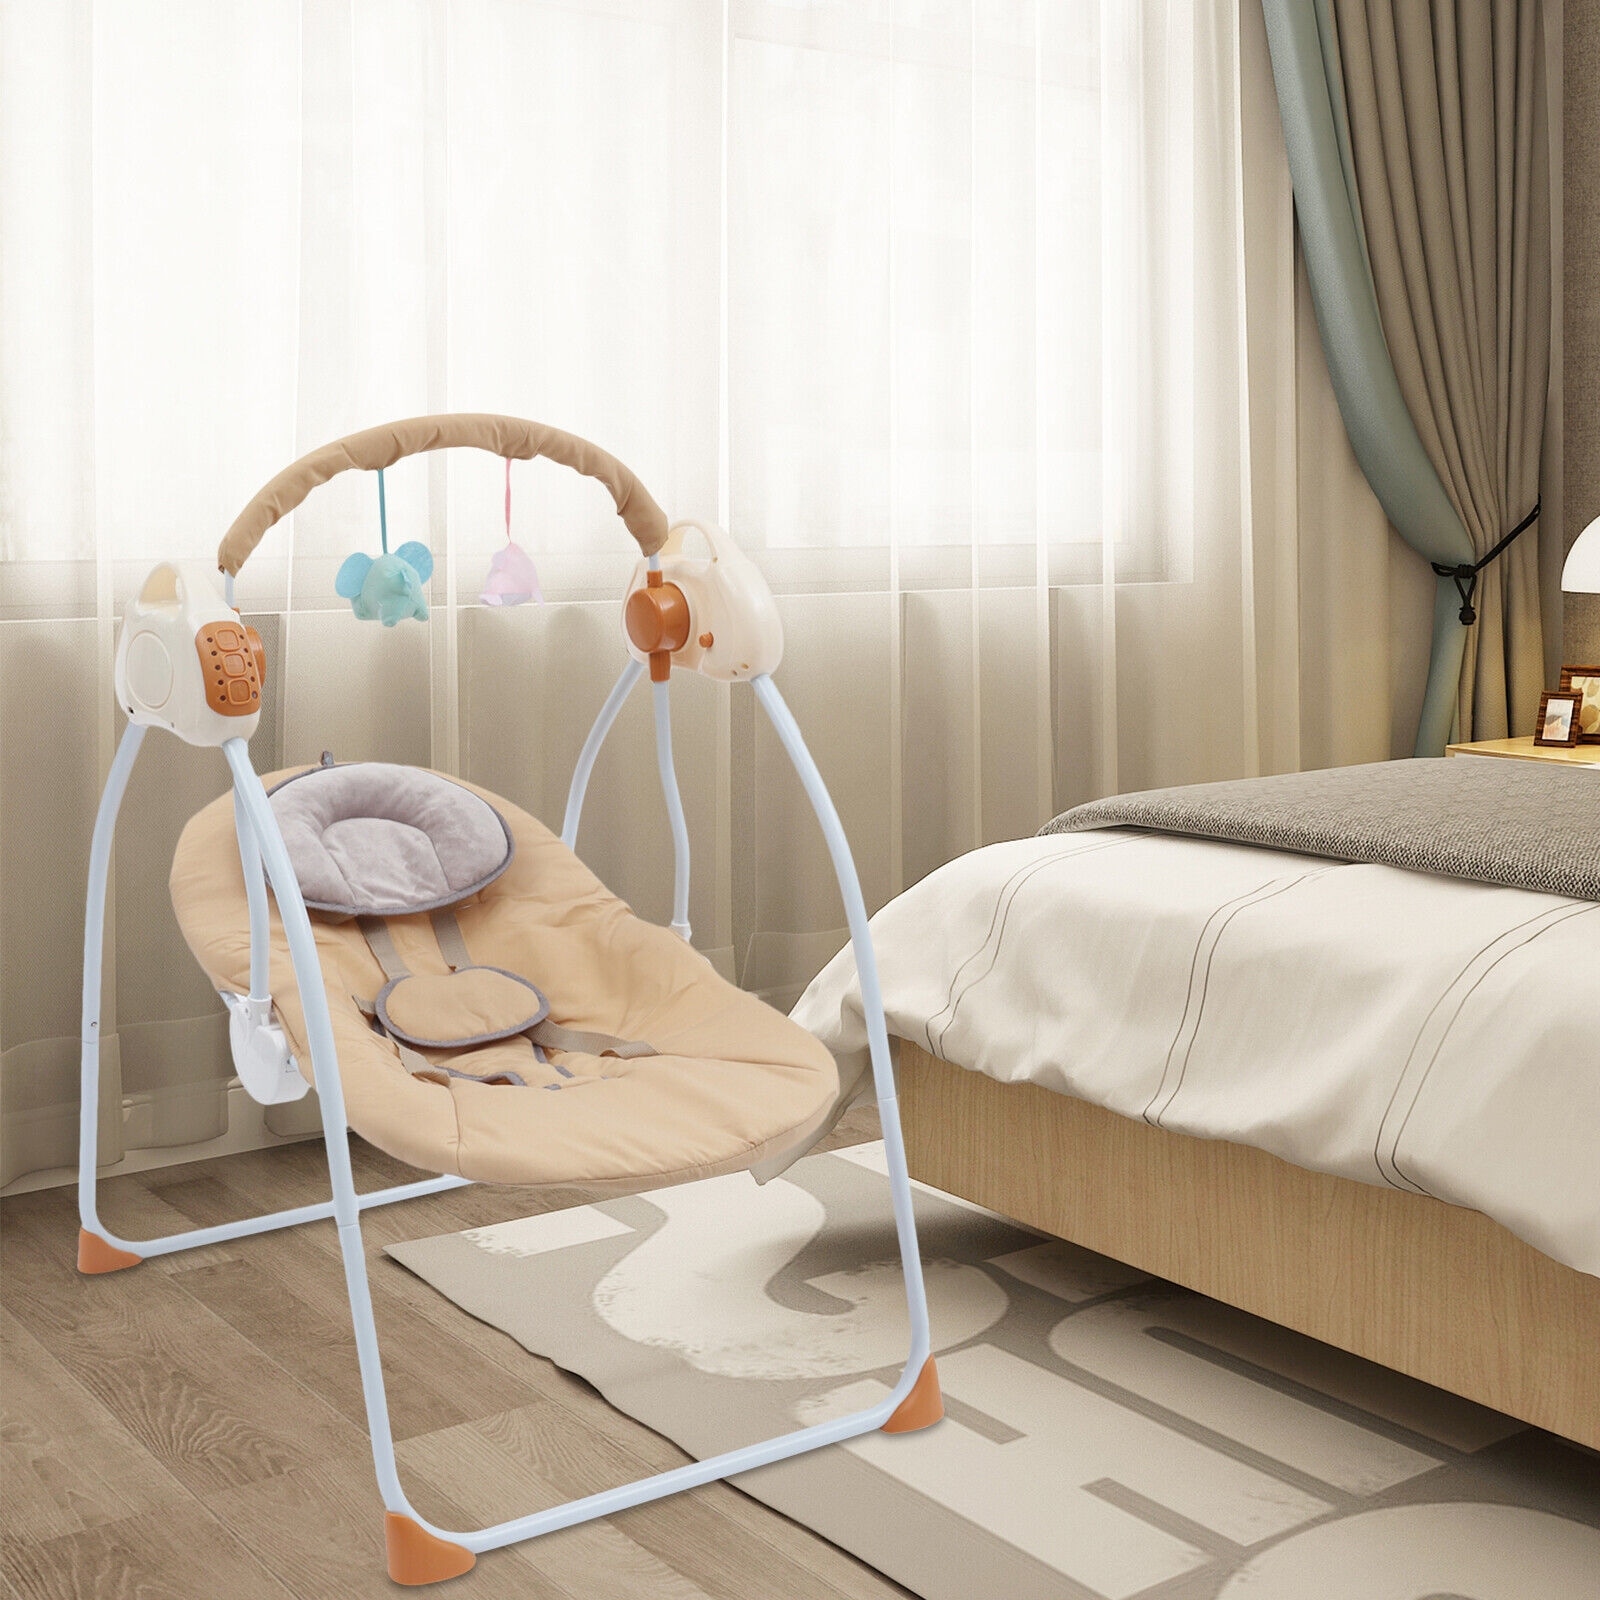 Lofn Electric Baby Bouncer Bluetooth Swing Chair Cradle Rocking Bassinet -  On Sale - Bed Bath & Beyond - 36742039